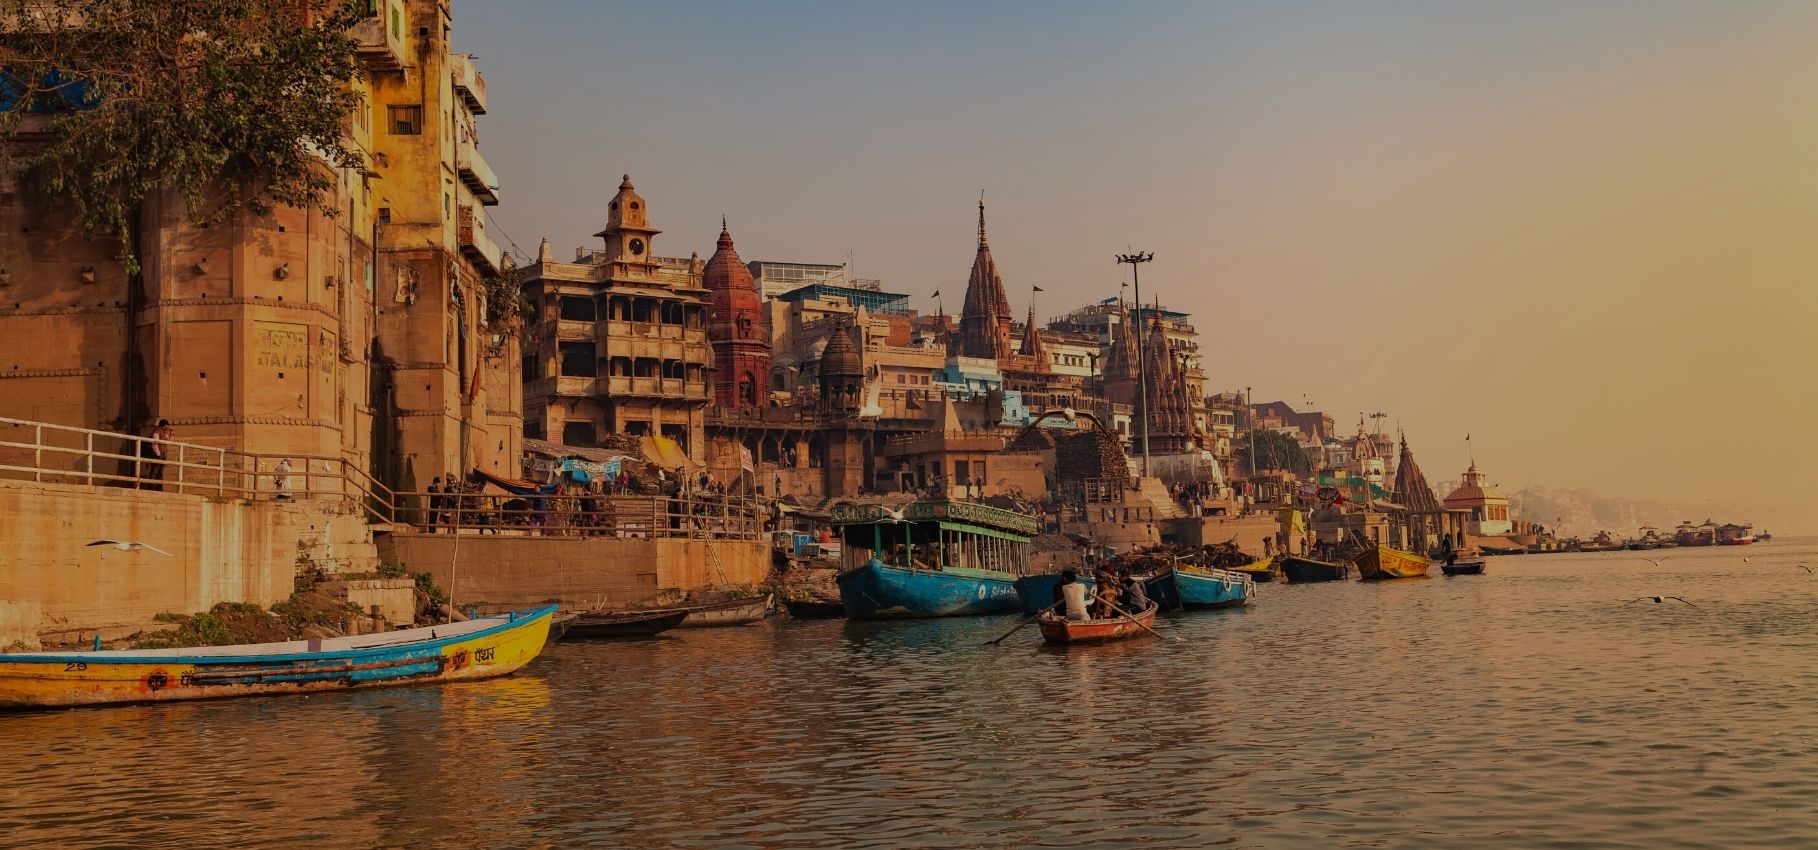 The Best Places to Visit in Varanasi, India